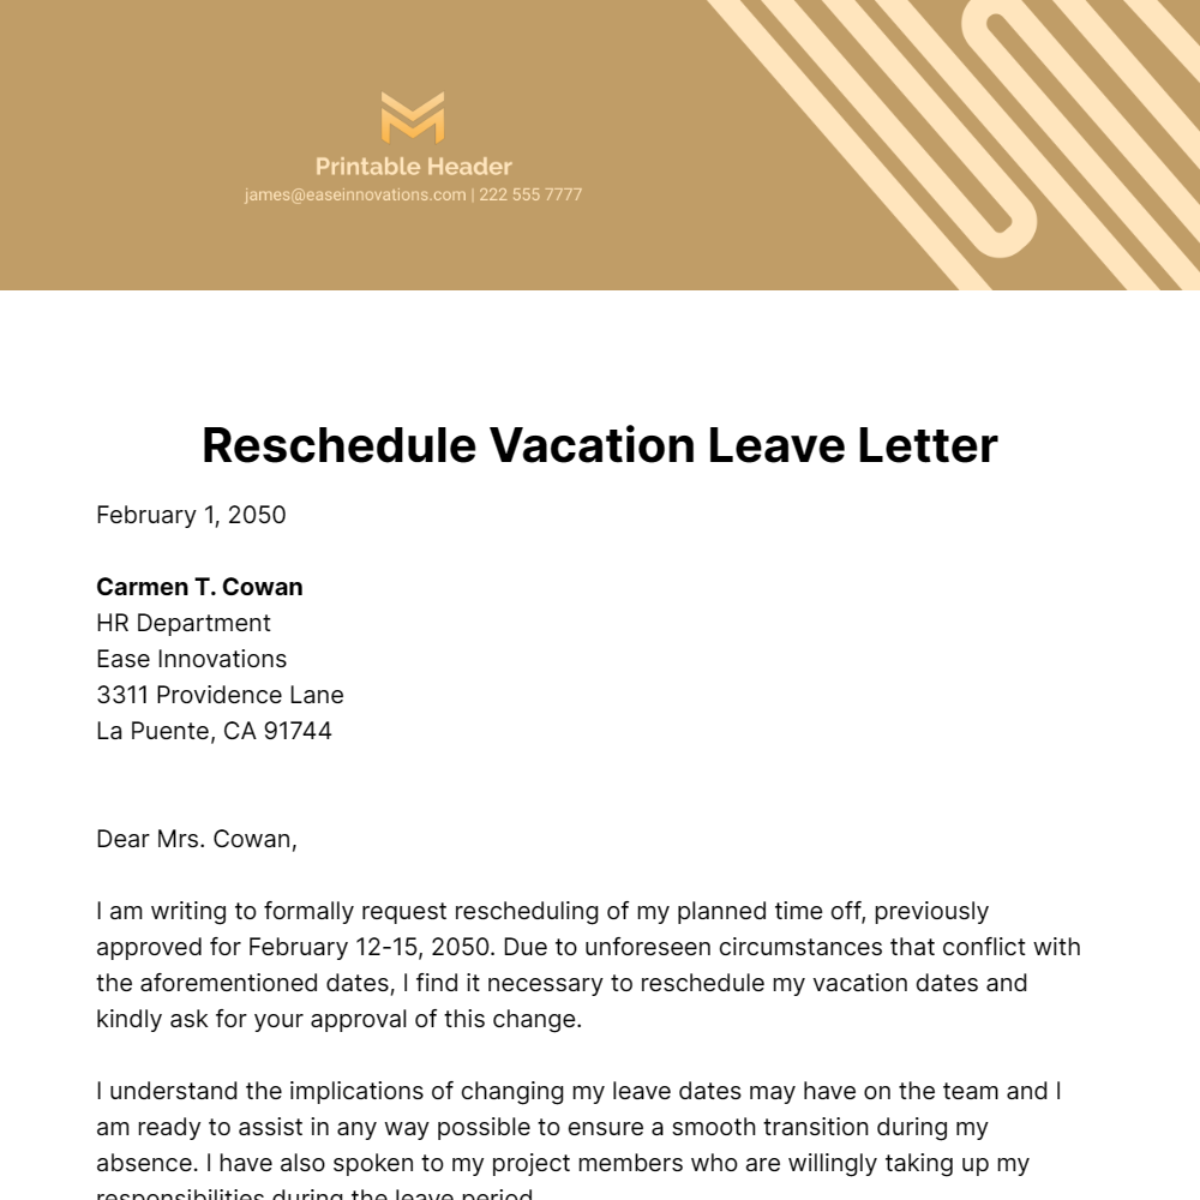 Reschedule Vacation Leave Letter Template